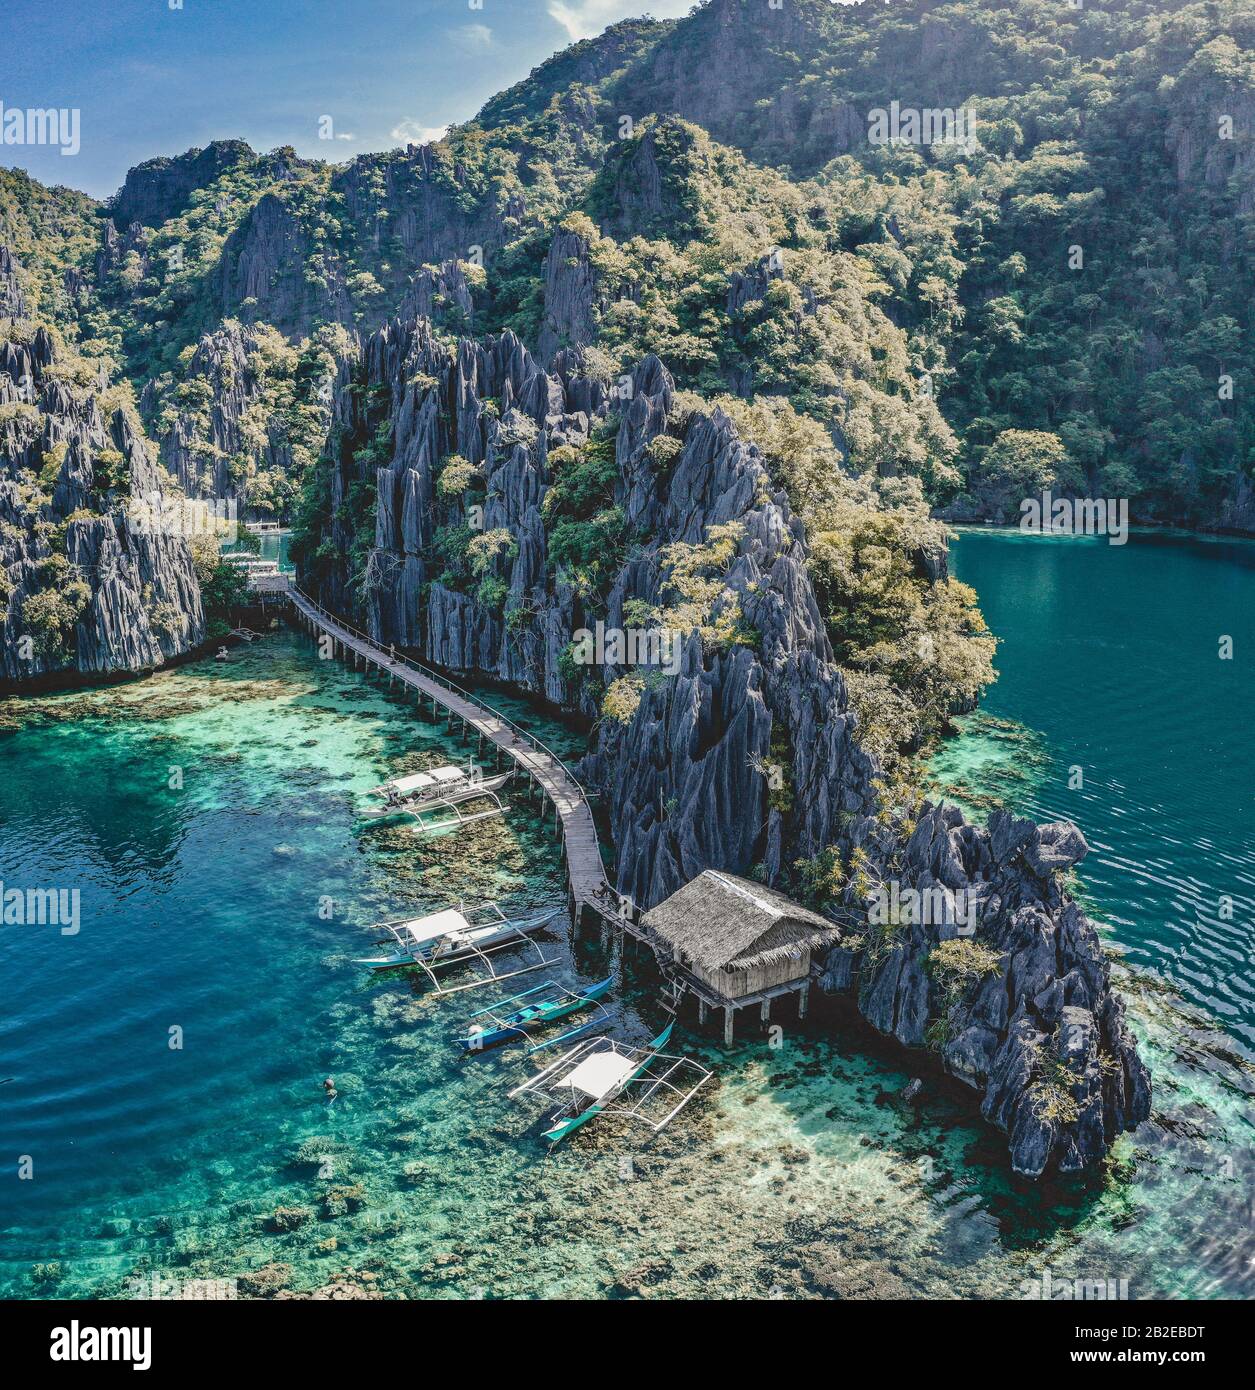 Aerial view of the Twin Lagoon in coron island, Palawan, Philippines Stock Photo